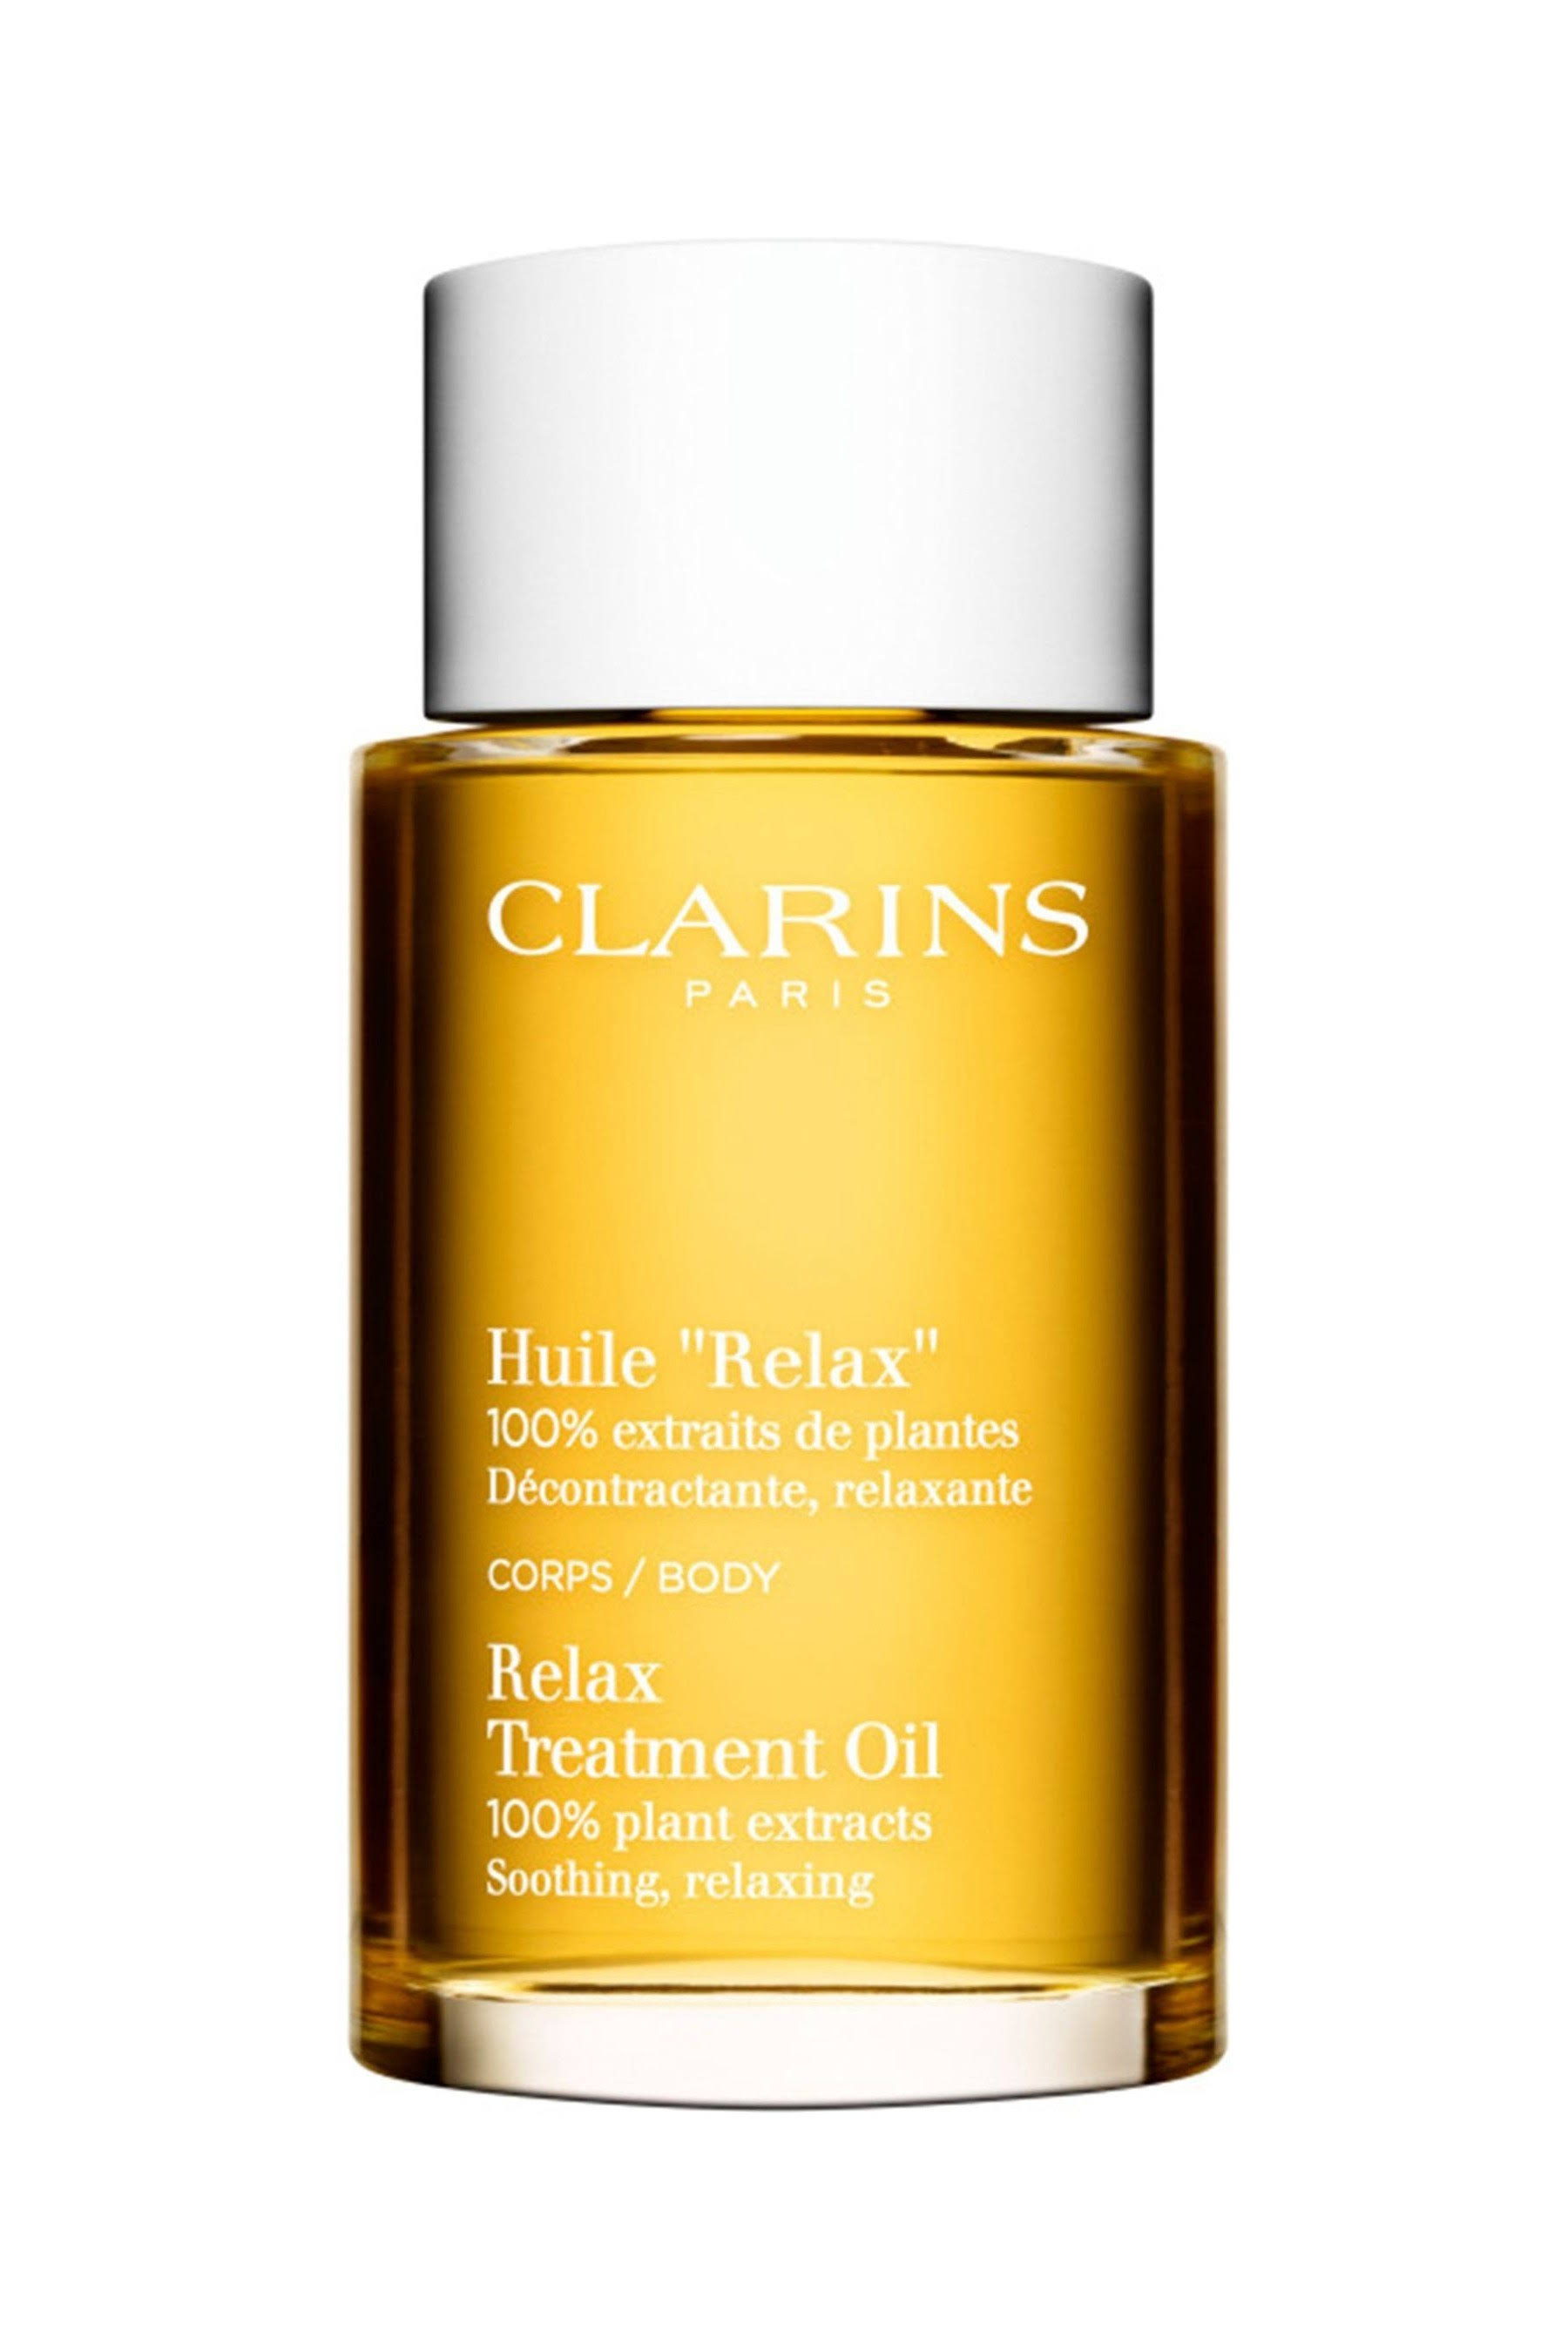 Clarins Huile Relax Body Treatment Oil - 100ml